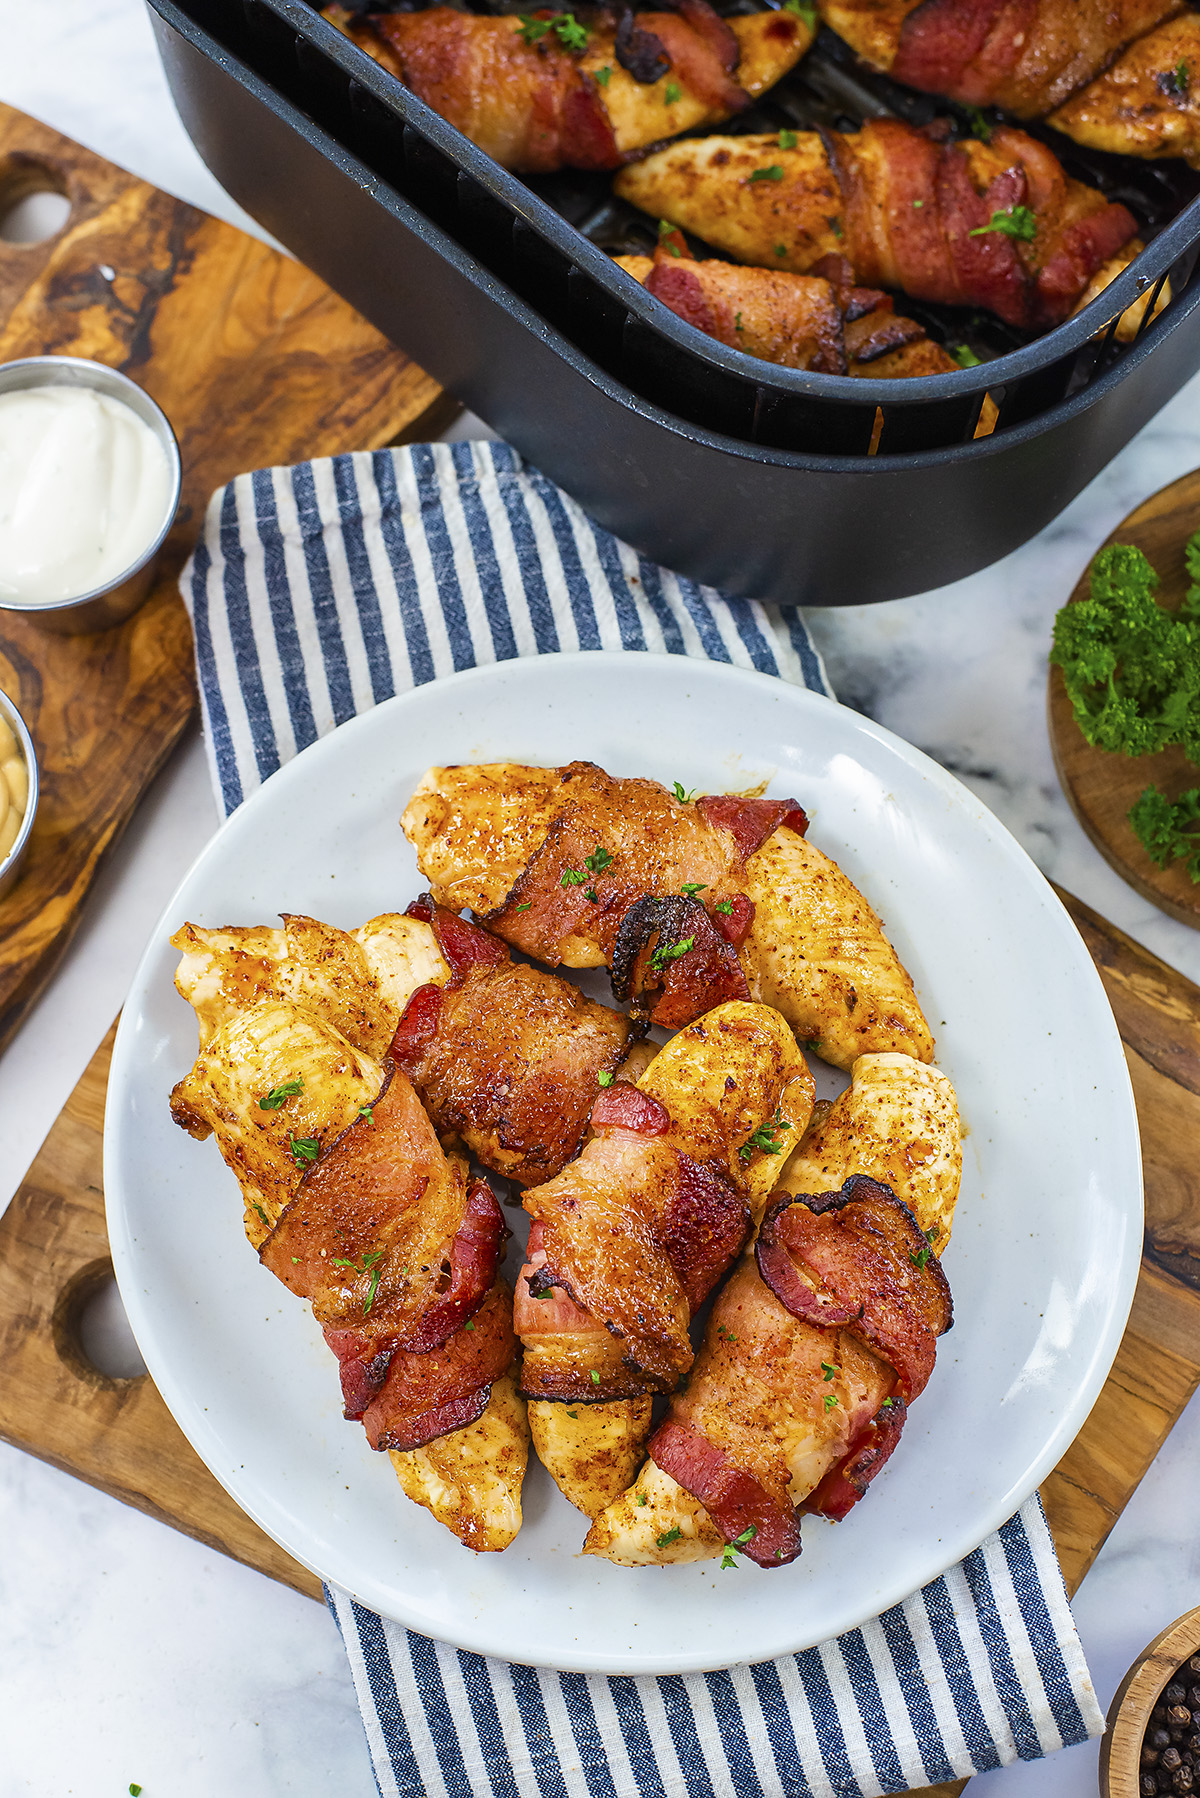 Bacon wrapped chicken tenders on a plate in front of an air fryer basket.